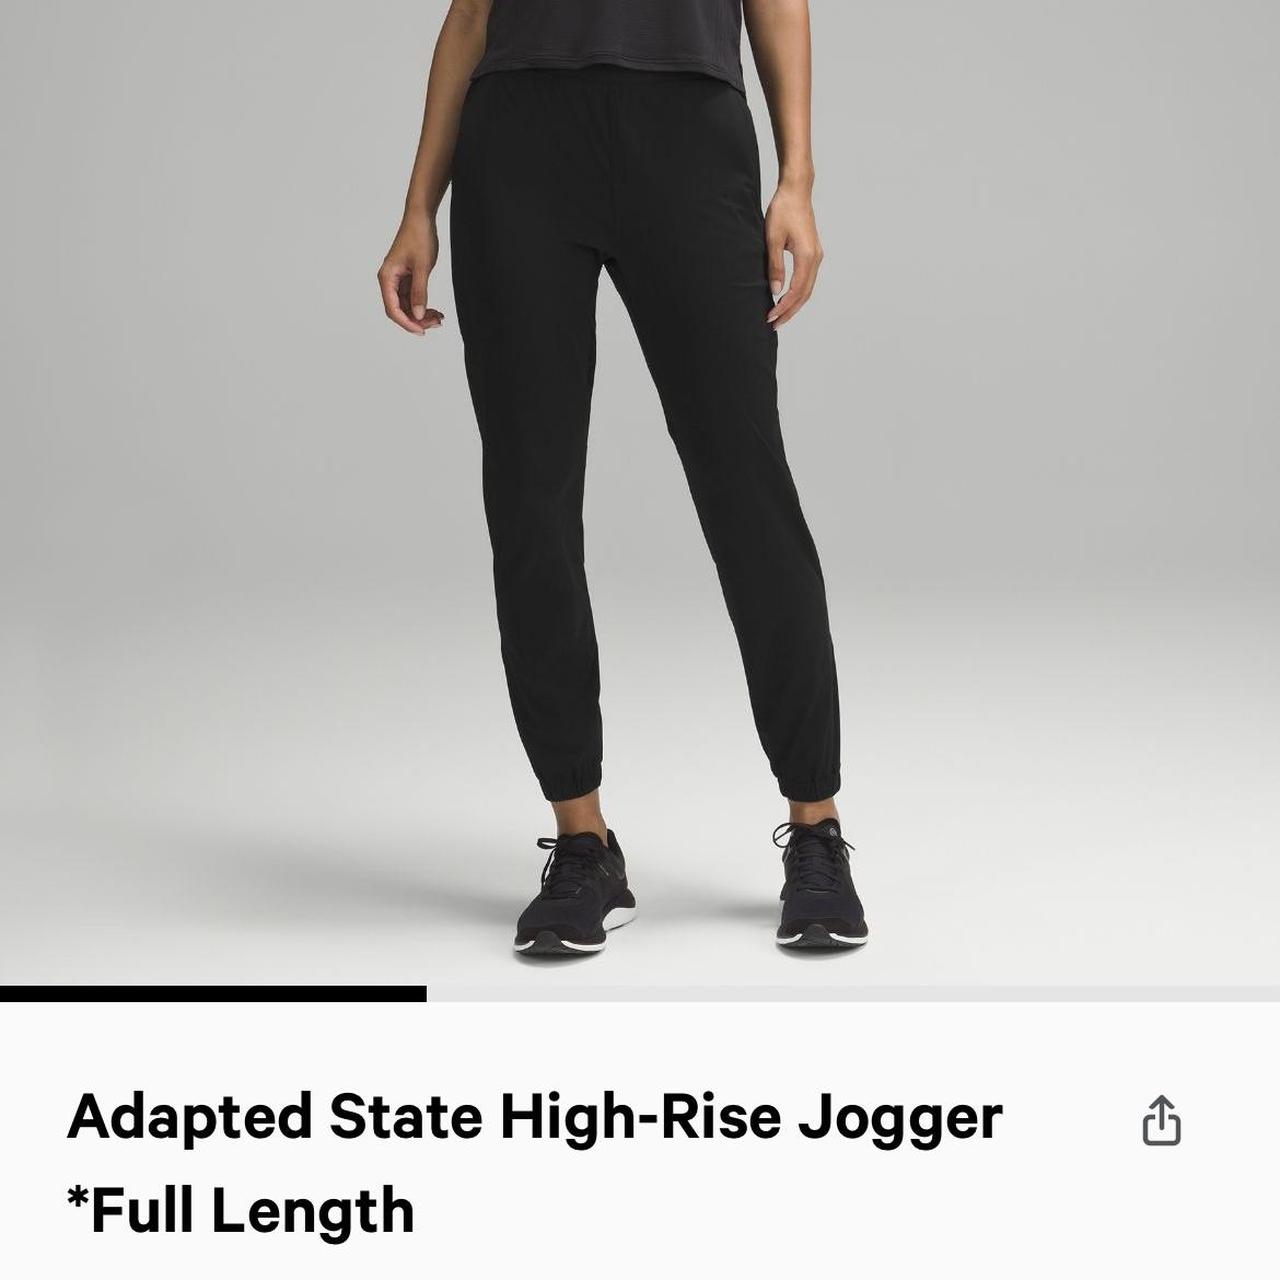 lululemon adapted state high rise jogger size 8 - Depop